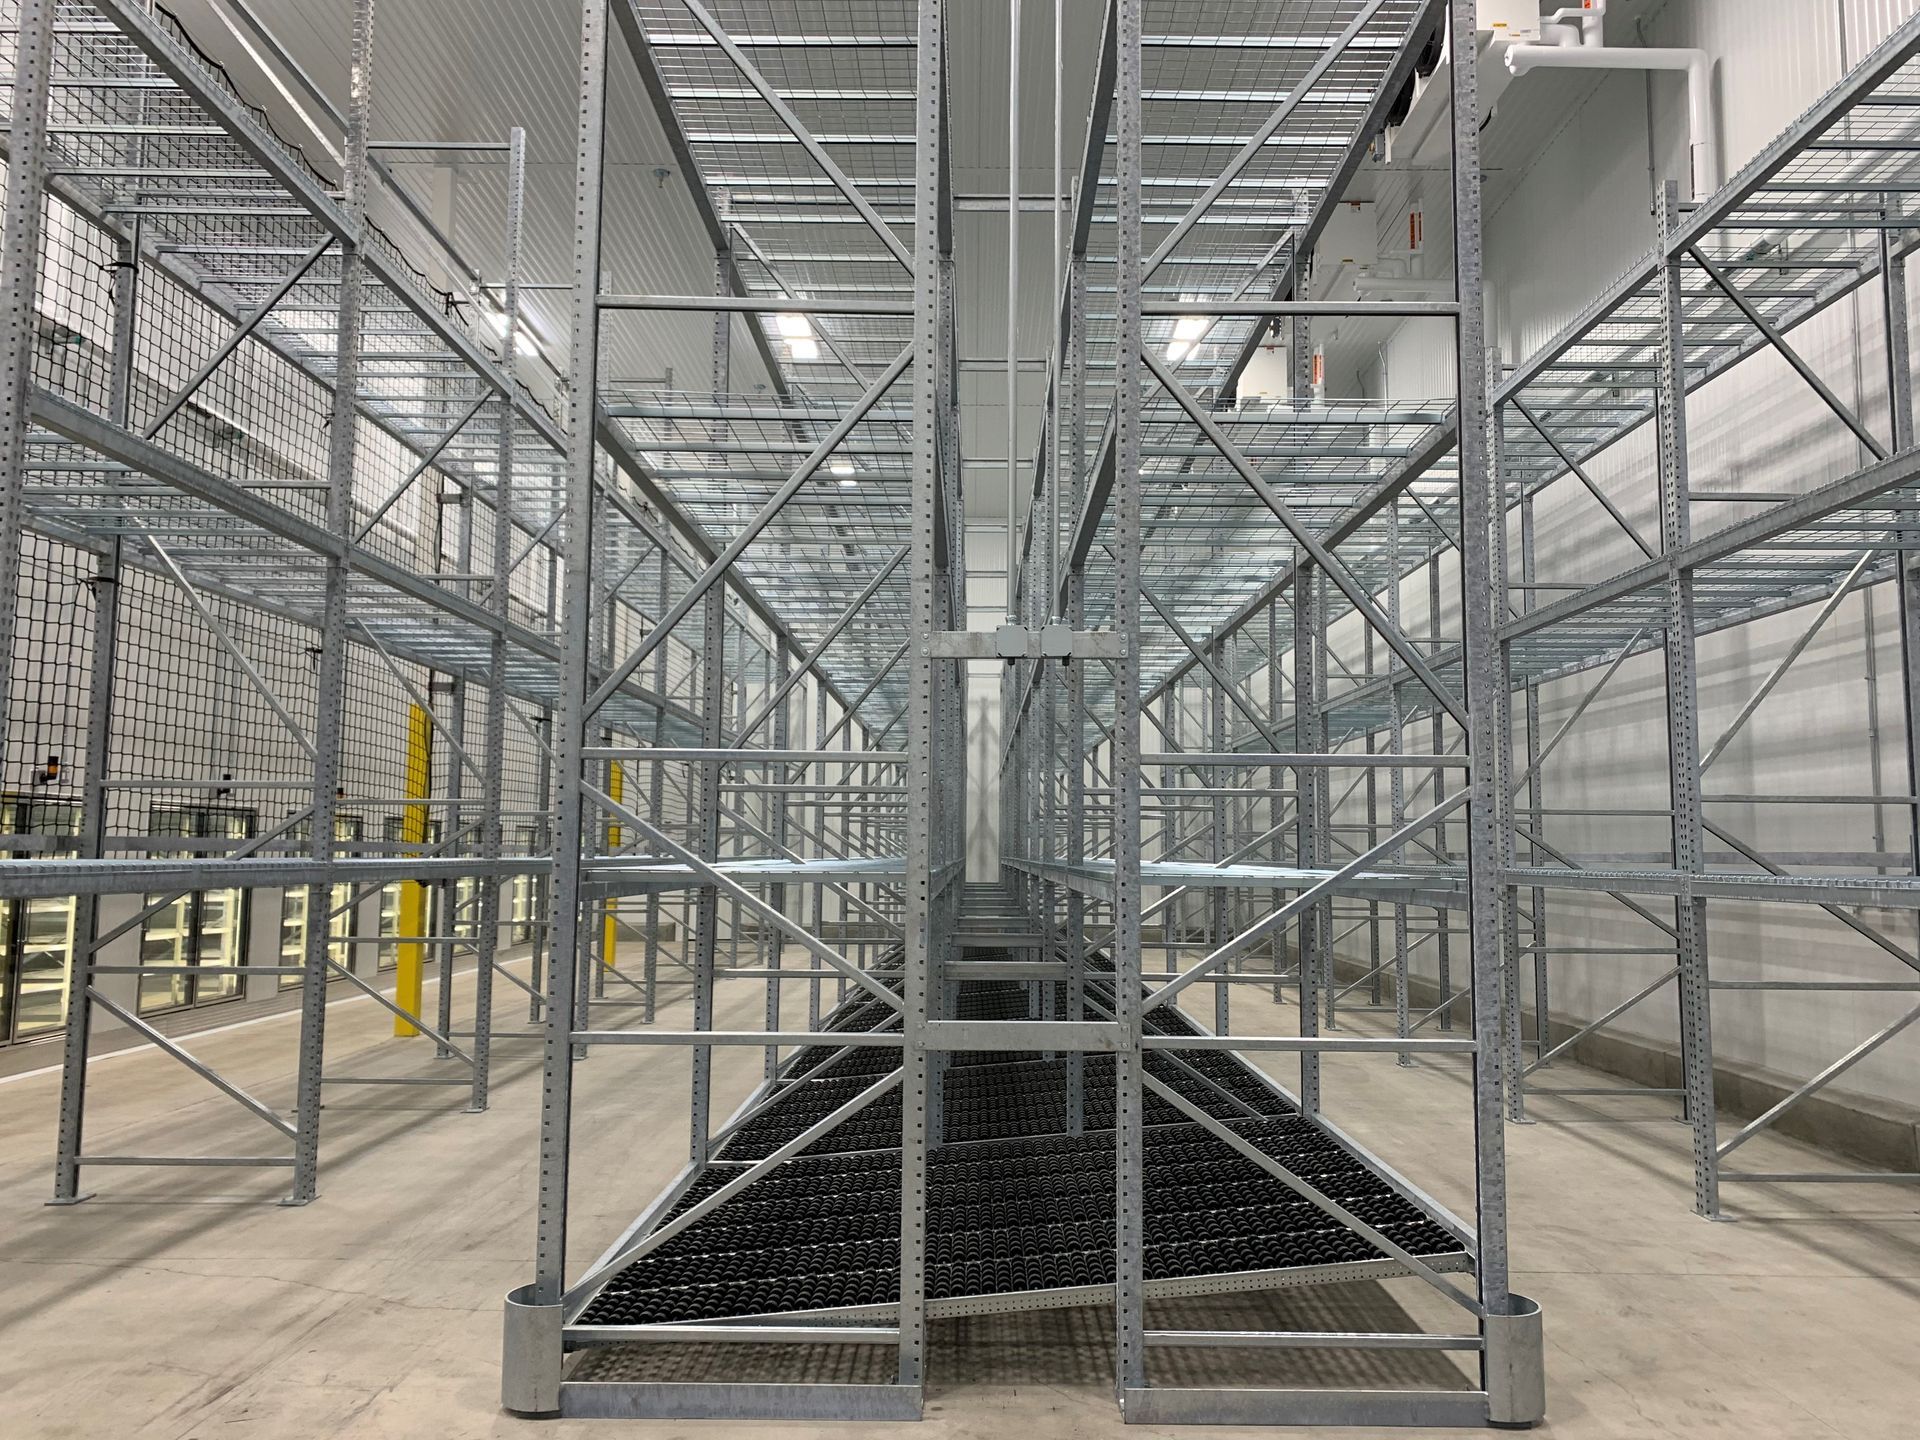 A large warehouse with lots of shelves and stairs.